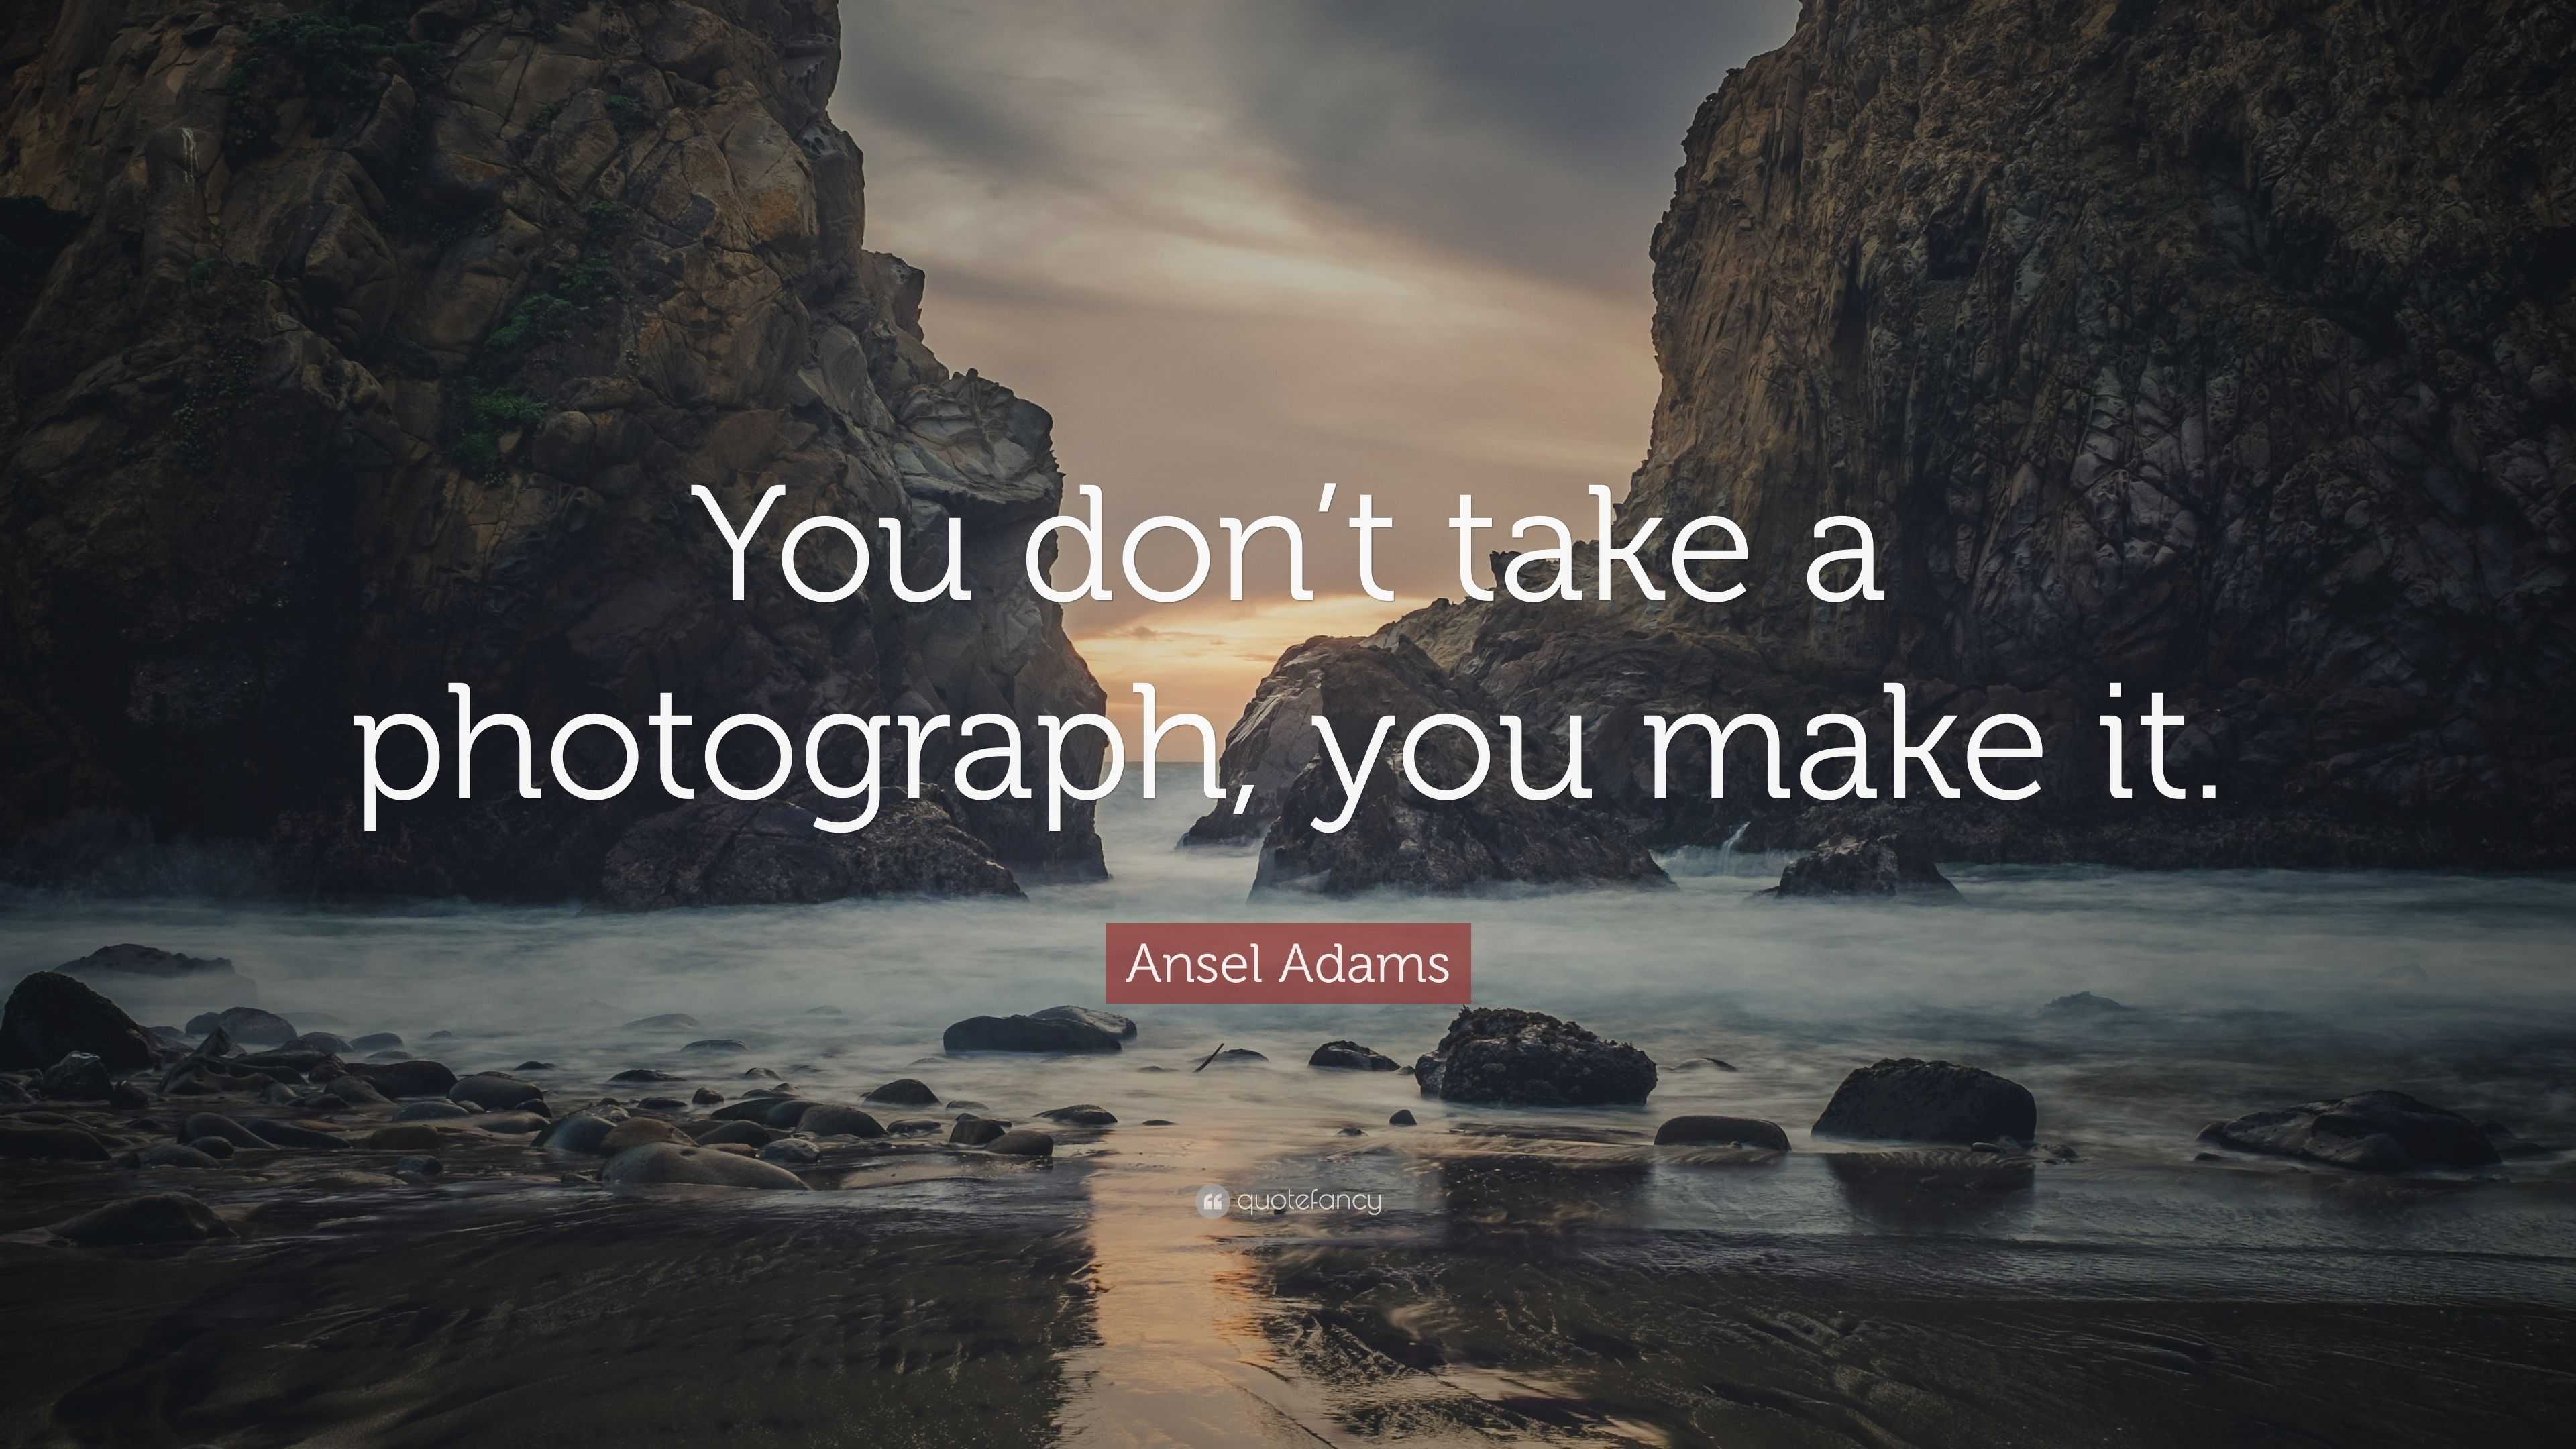 Ansel Adams Quote: “You don’t take a photograph, you make it.”